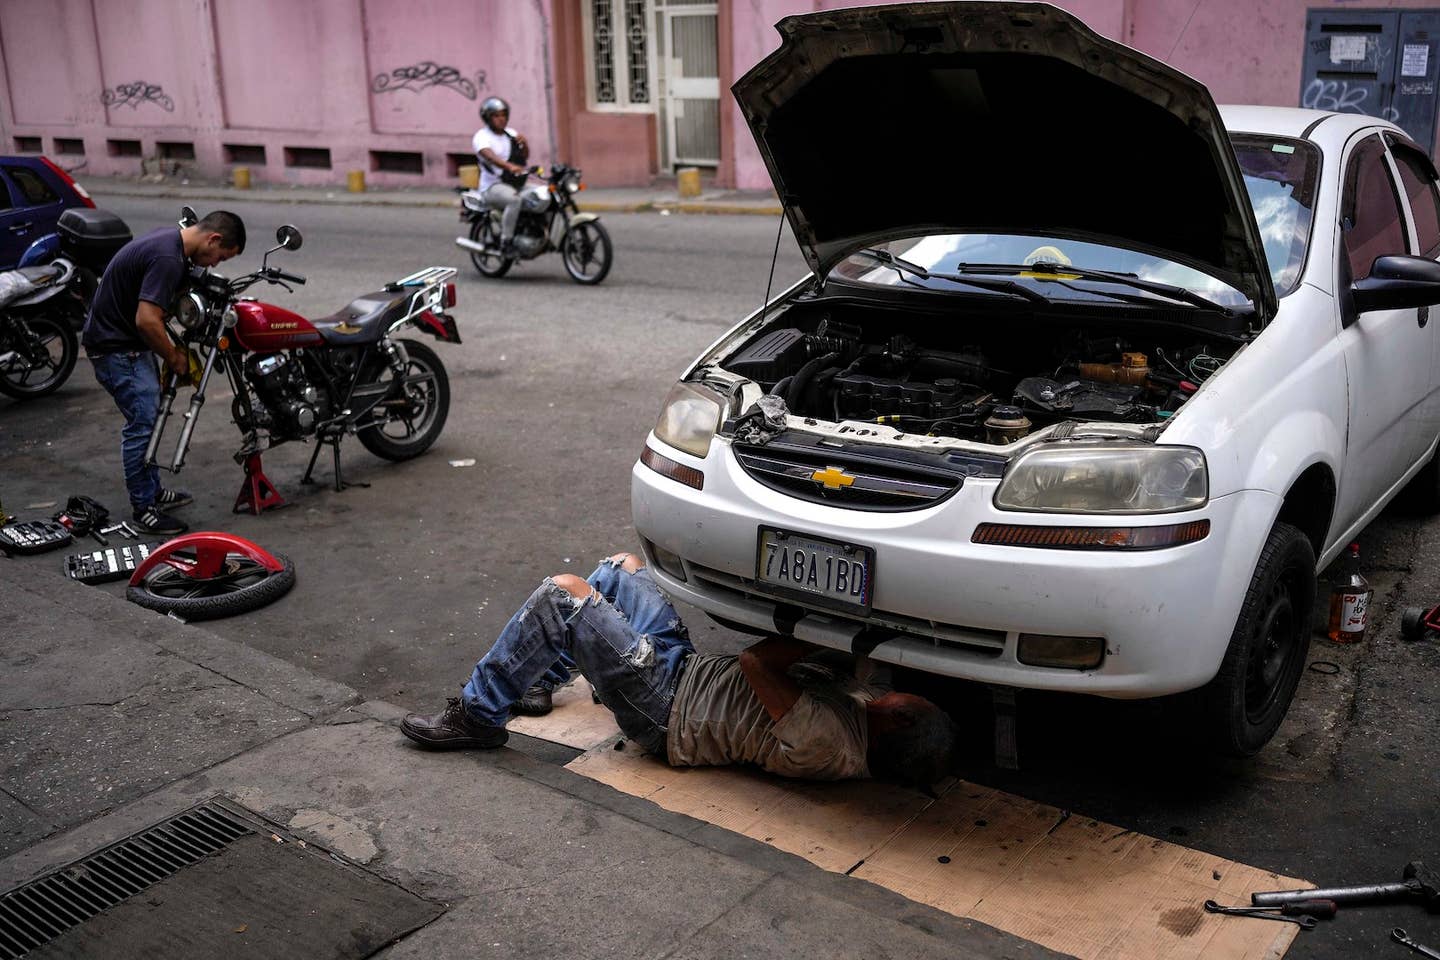 Carlos Valero repairs his car's exhaust system, in the San Agustin neighborhood of Caracas, Venezuela, Tuesday, April 19, 2022. Drivers try to coax a little more life out of aging vehicles in a country whose new car market collapsed and where few can afford to trade up for a better used one. (AP Photo/Matias Delacroix)